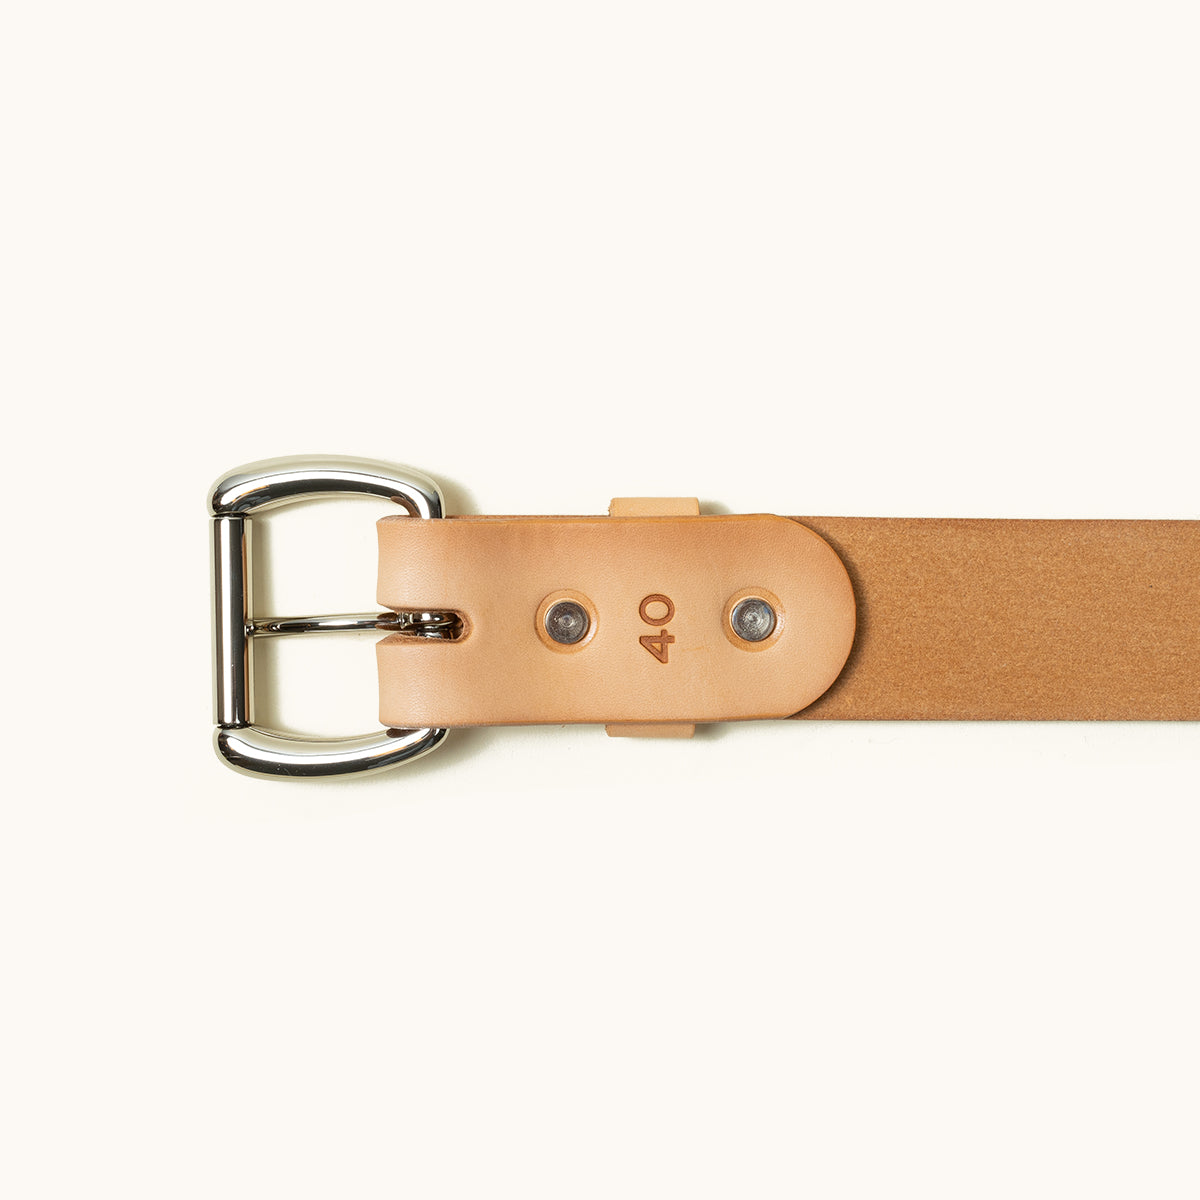 The bottom half of a Natural Standard belt showing a stainless roller ball buckle and two stainless rivets.